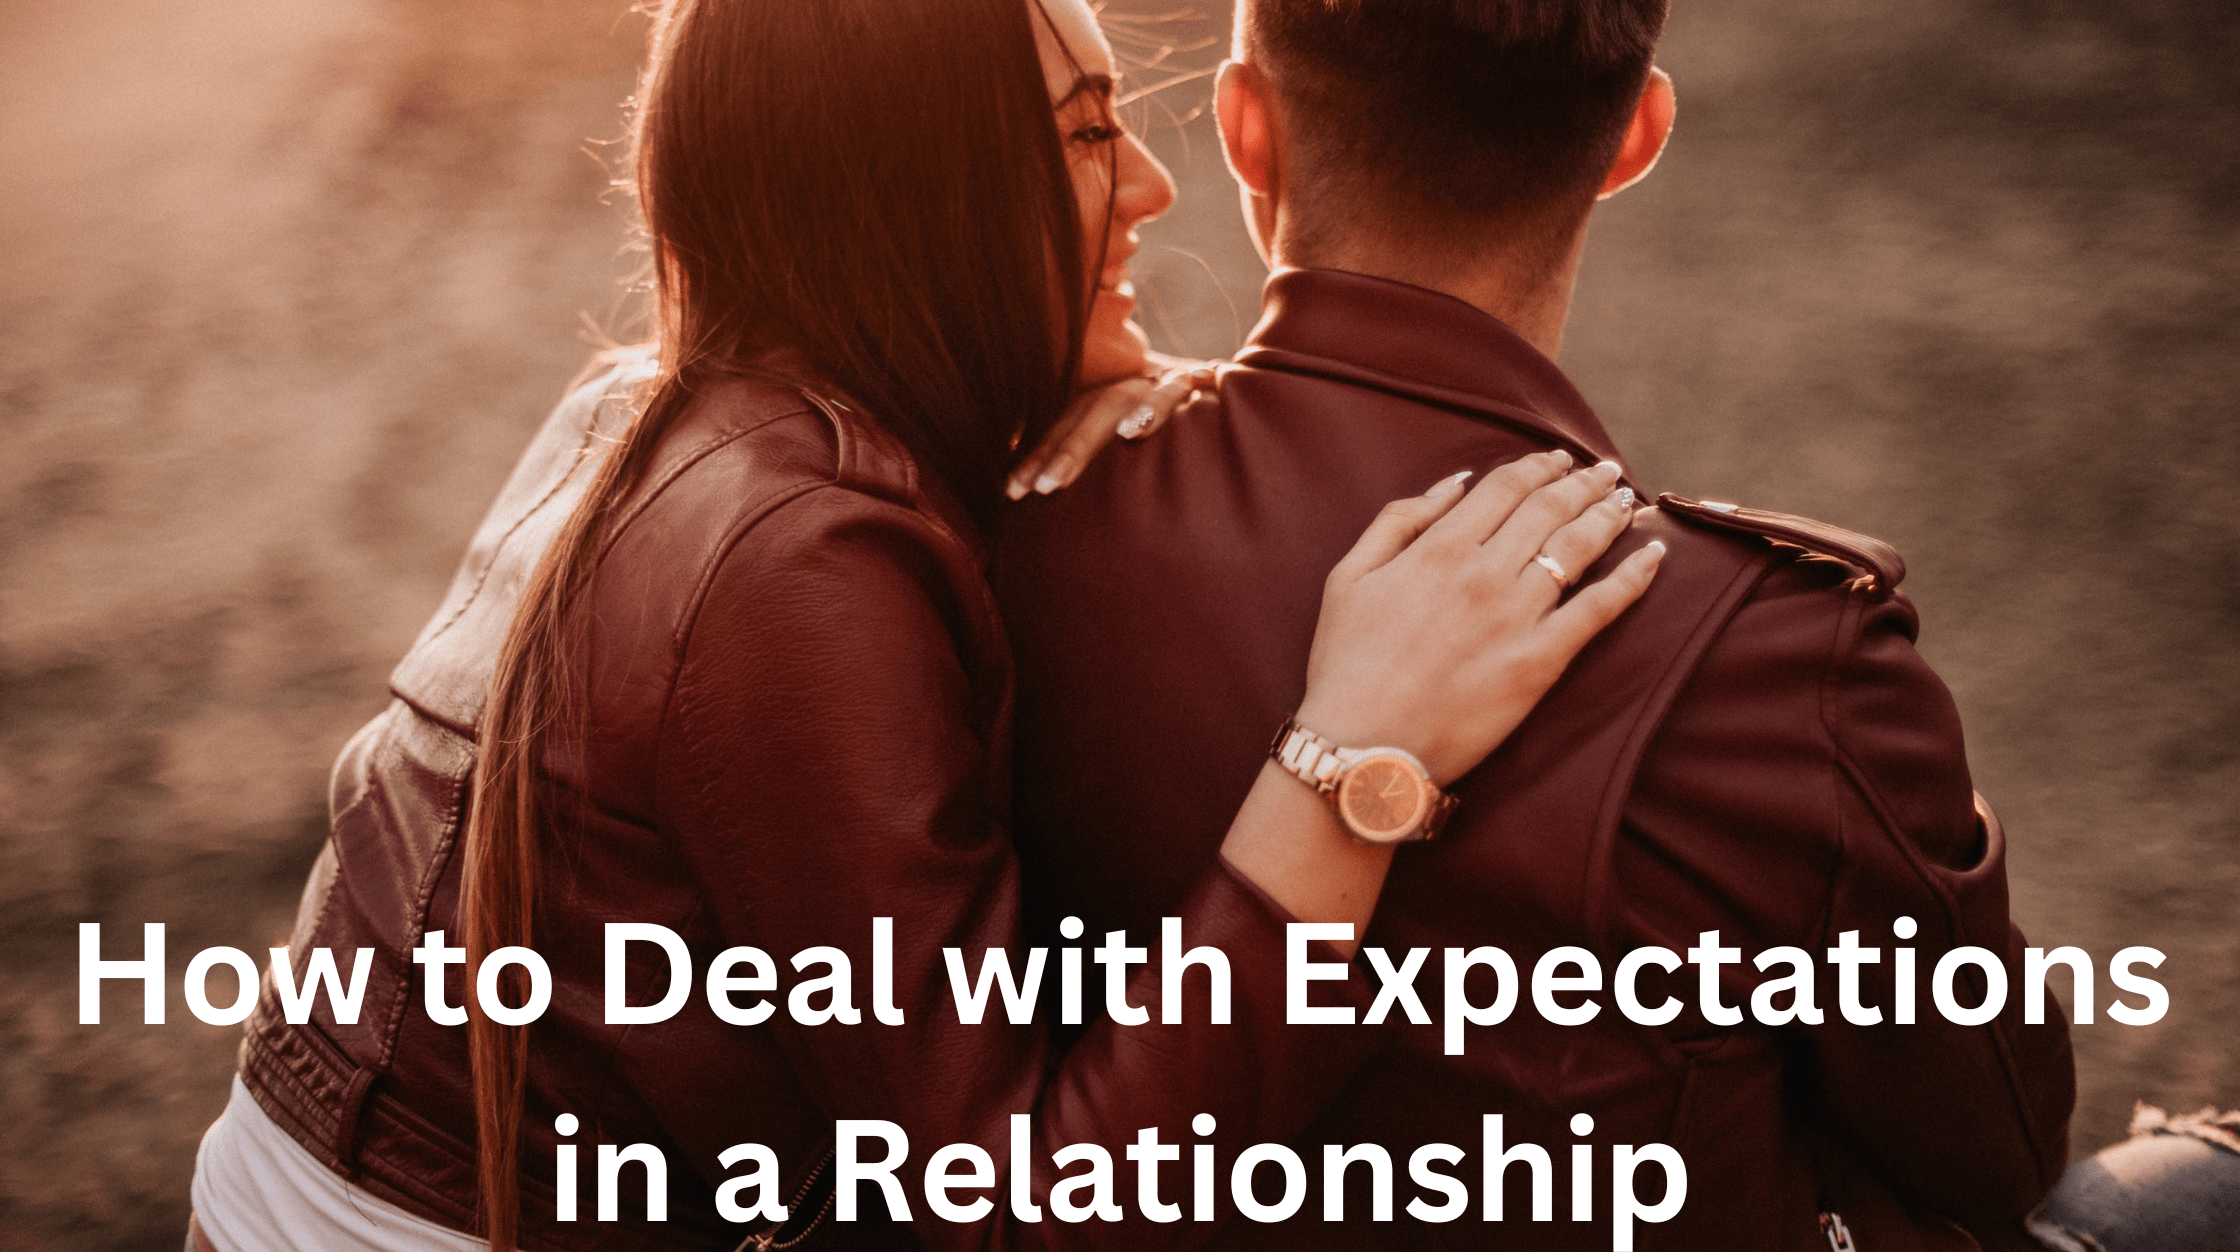 How to Deal with Expectations in a Relationship 27